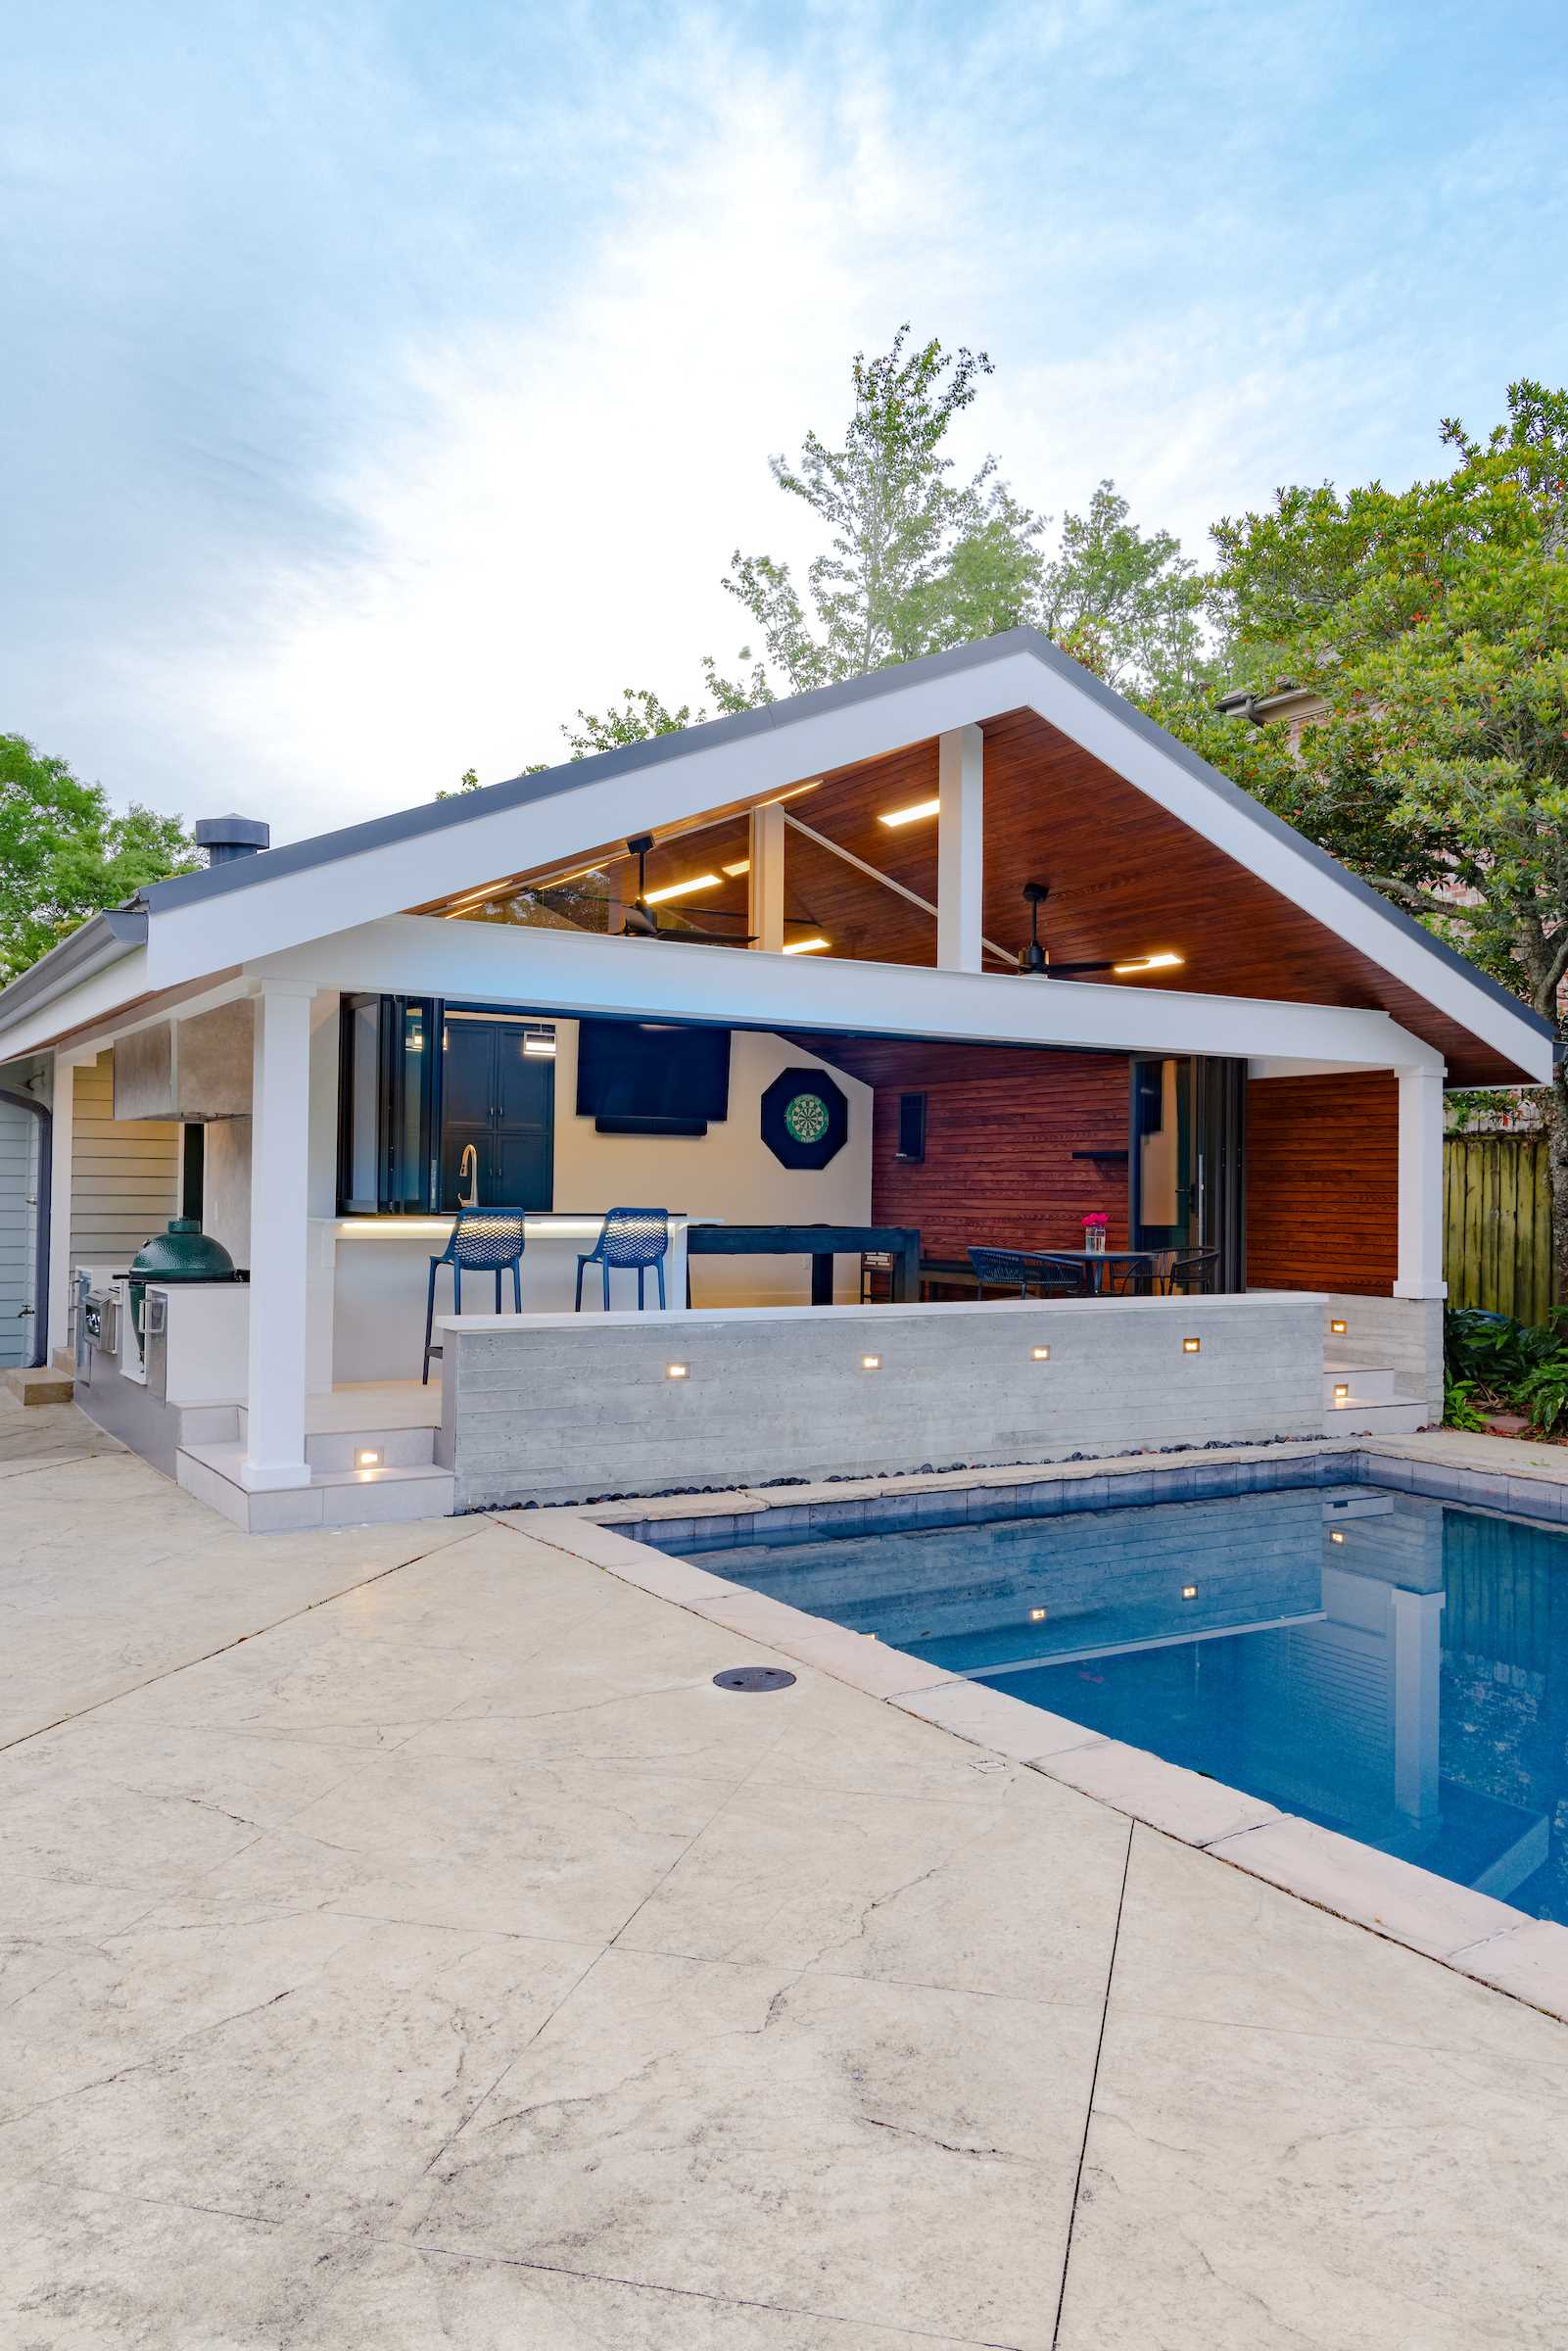 A garage was transformed into a modern pool house with a bar and covered seating.